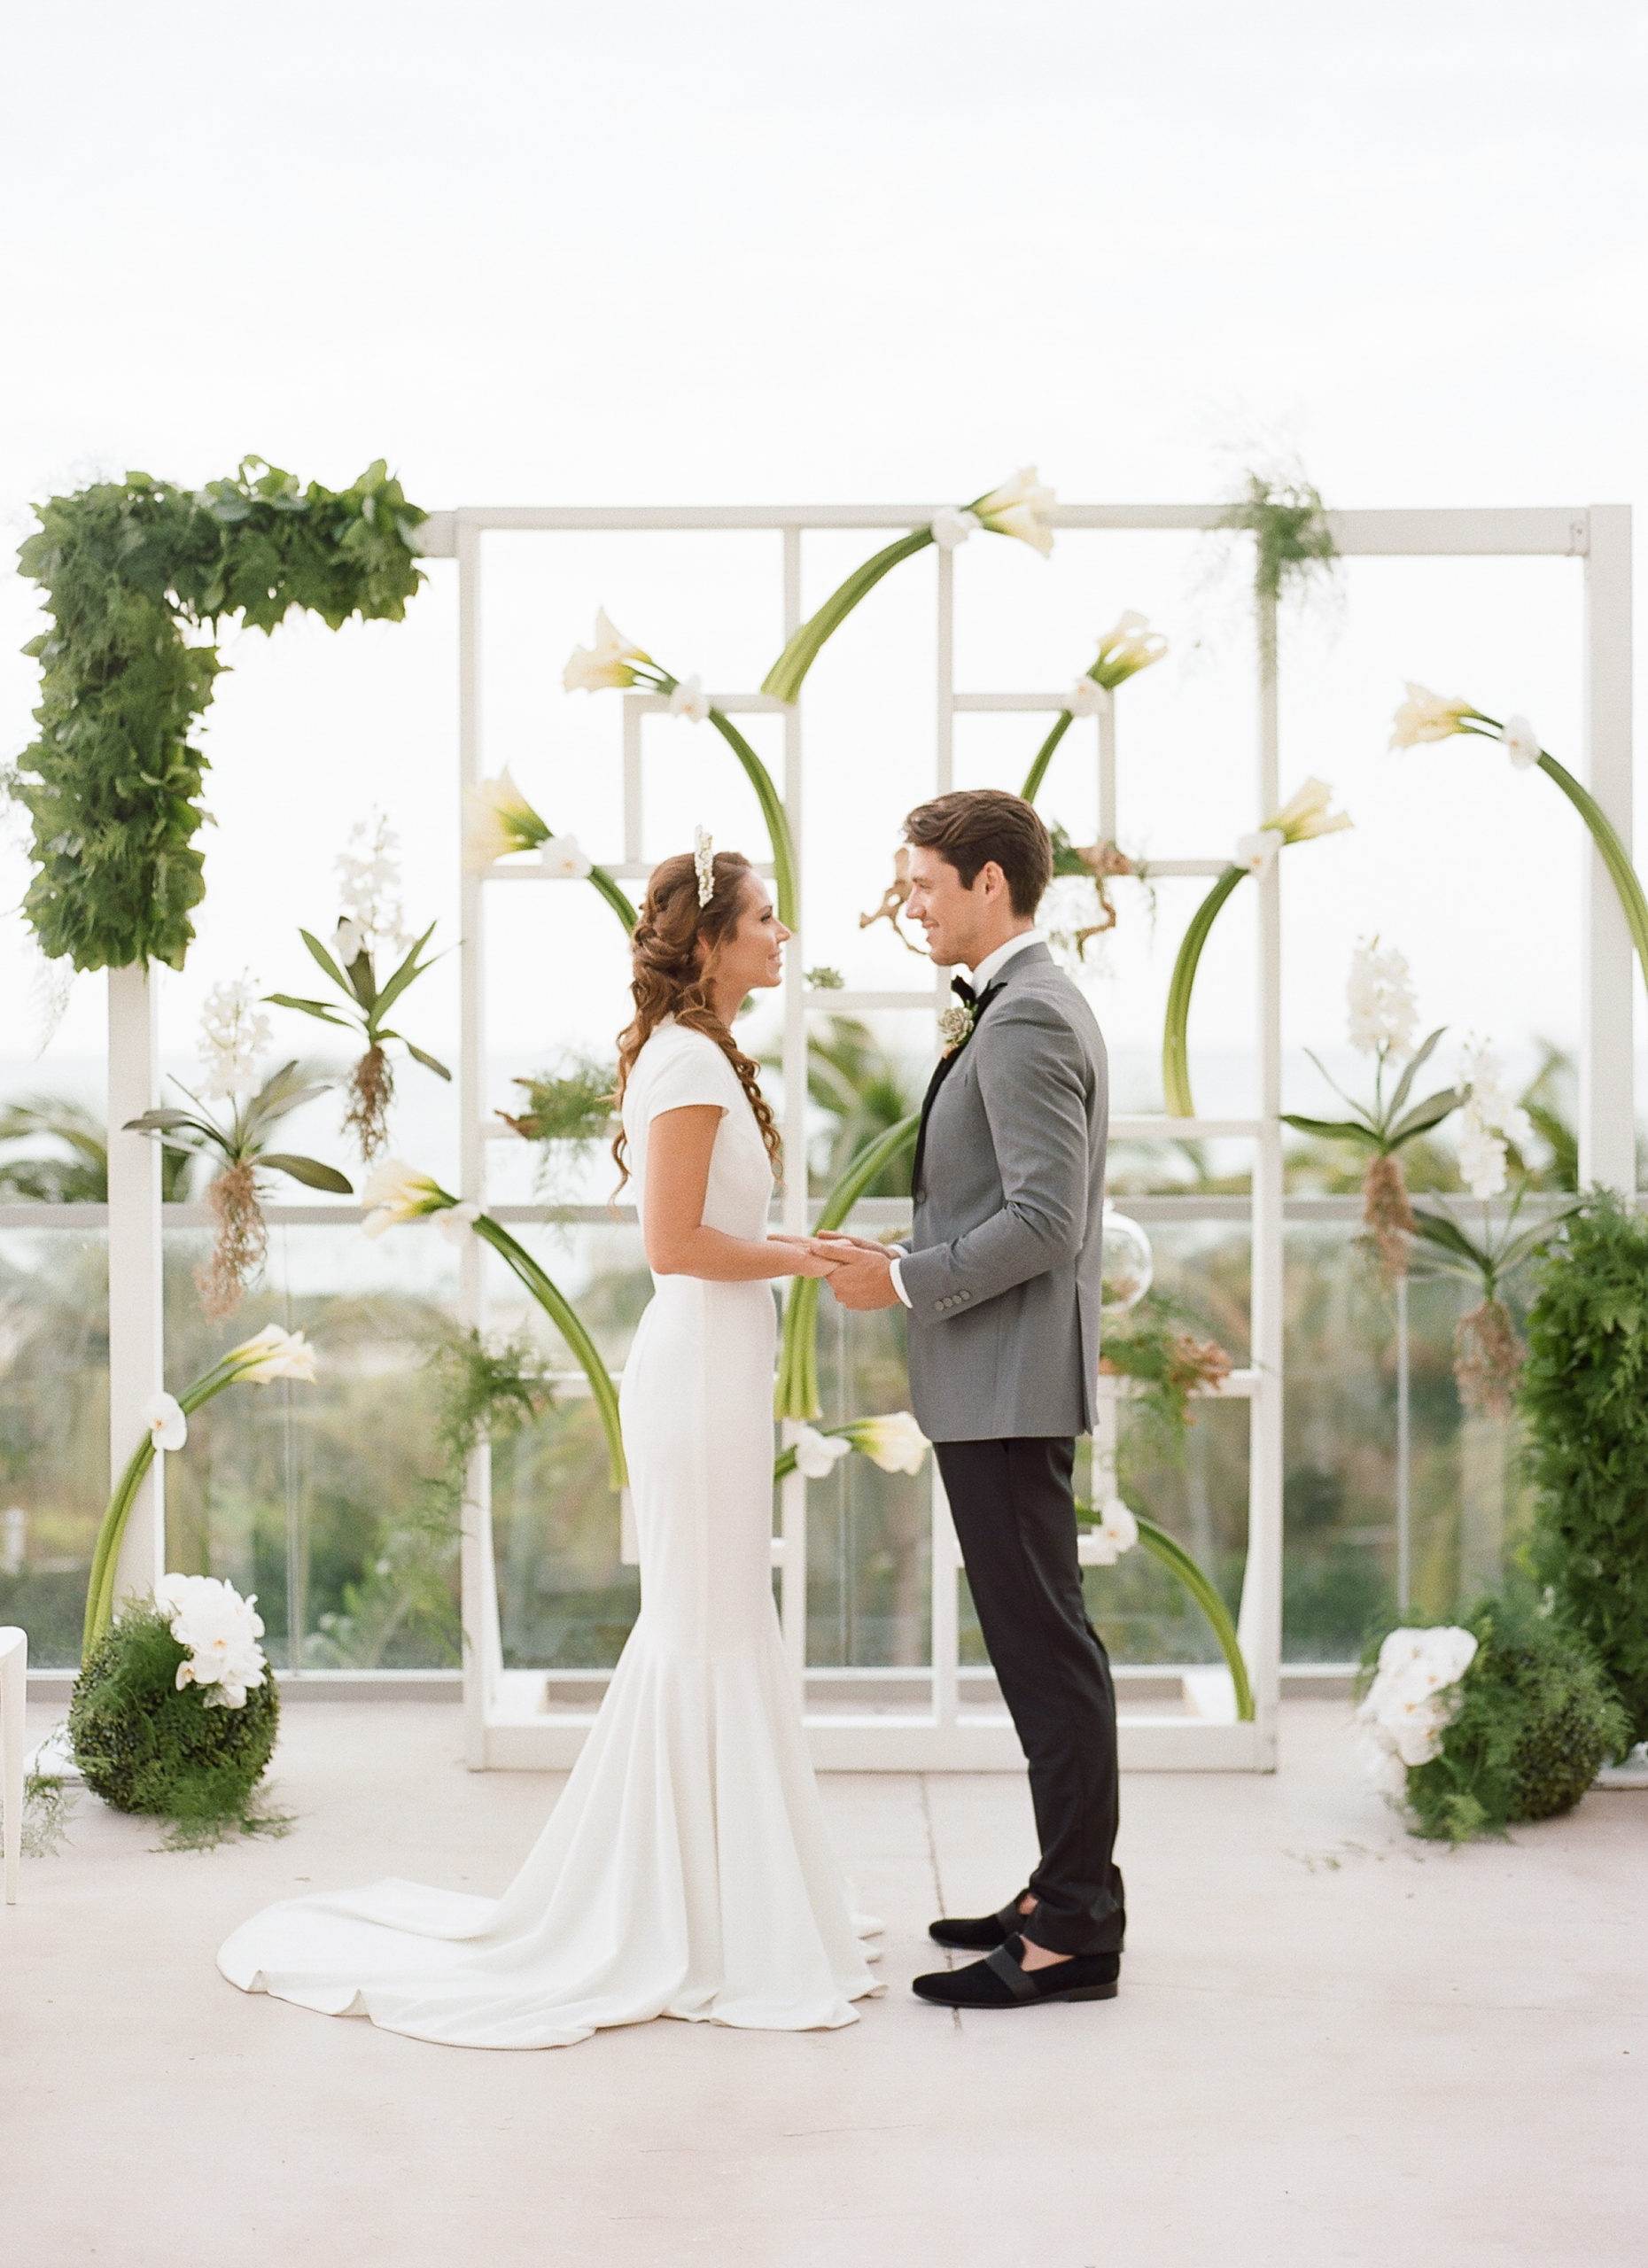 We created a truly unique wedding ceremony structure that incorporated calla lillies, orchids, and lots of greenery. The bride and groom married at the 1 Hotel terrace under the early evening sunset. | 1 Hotel wedding